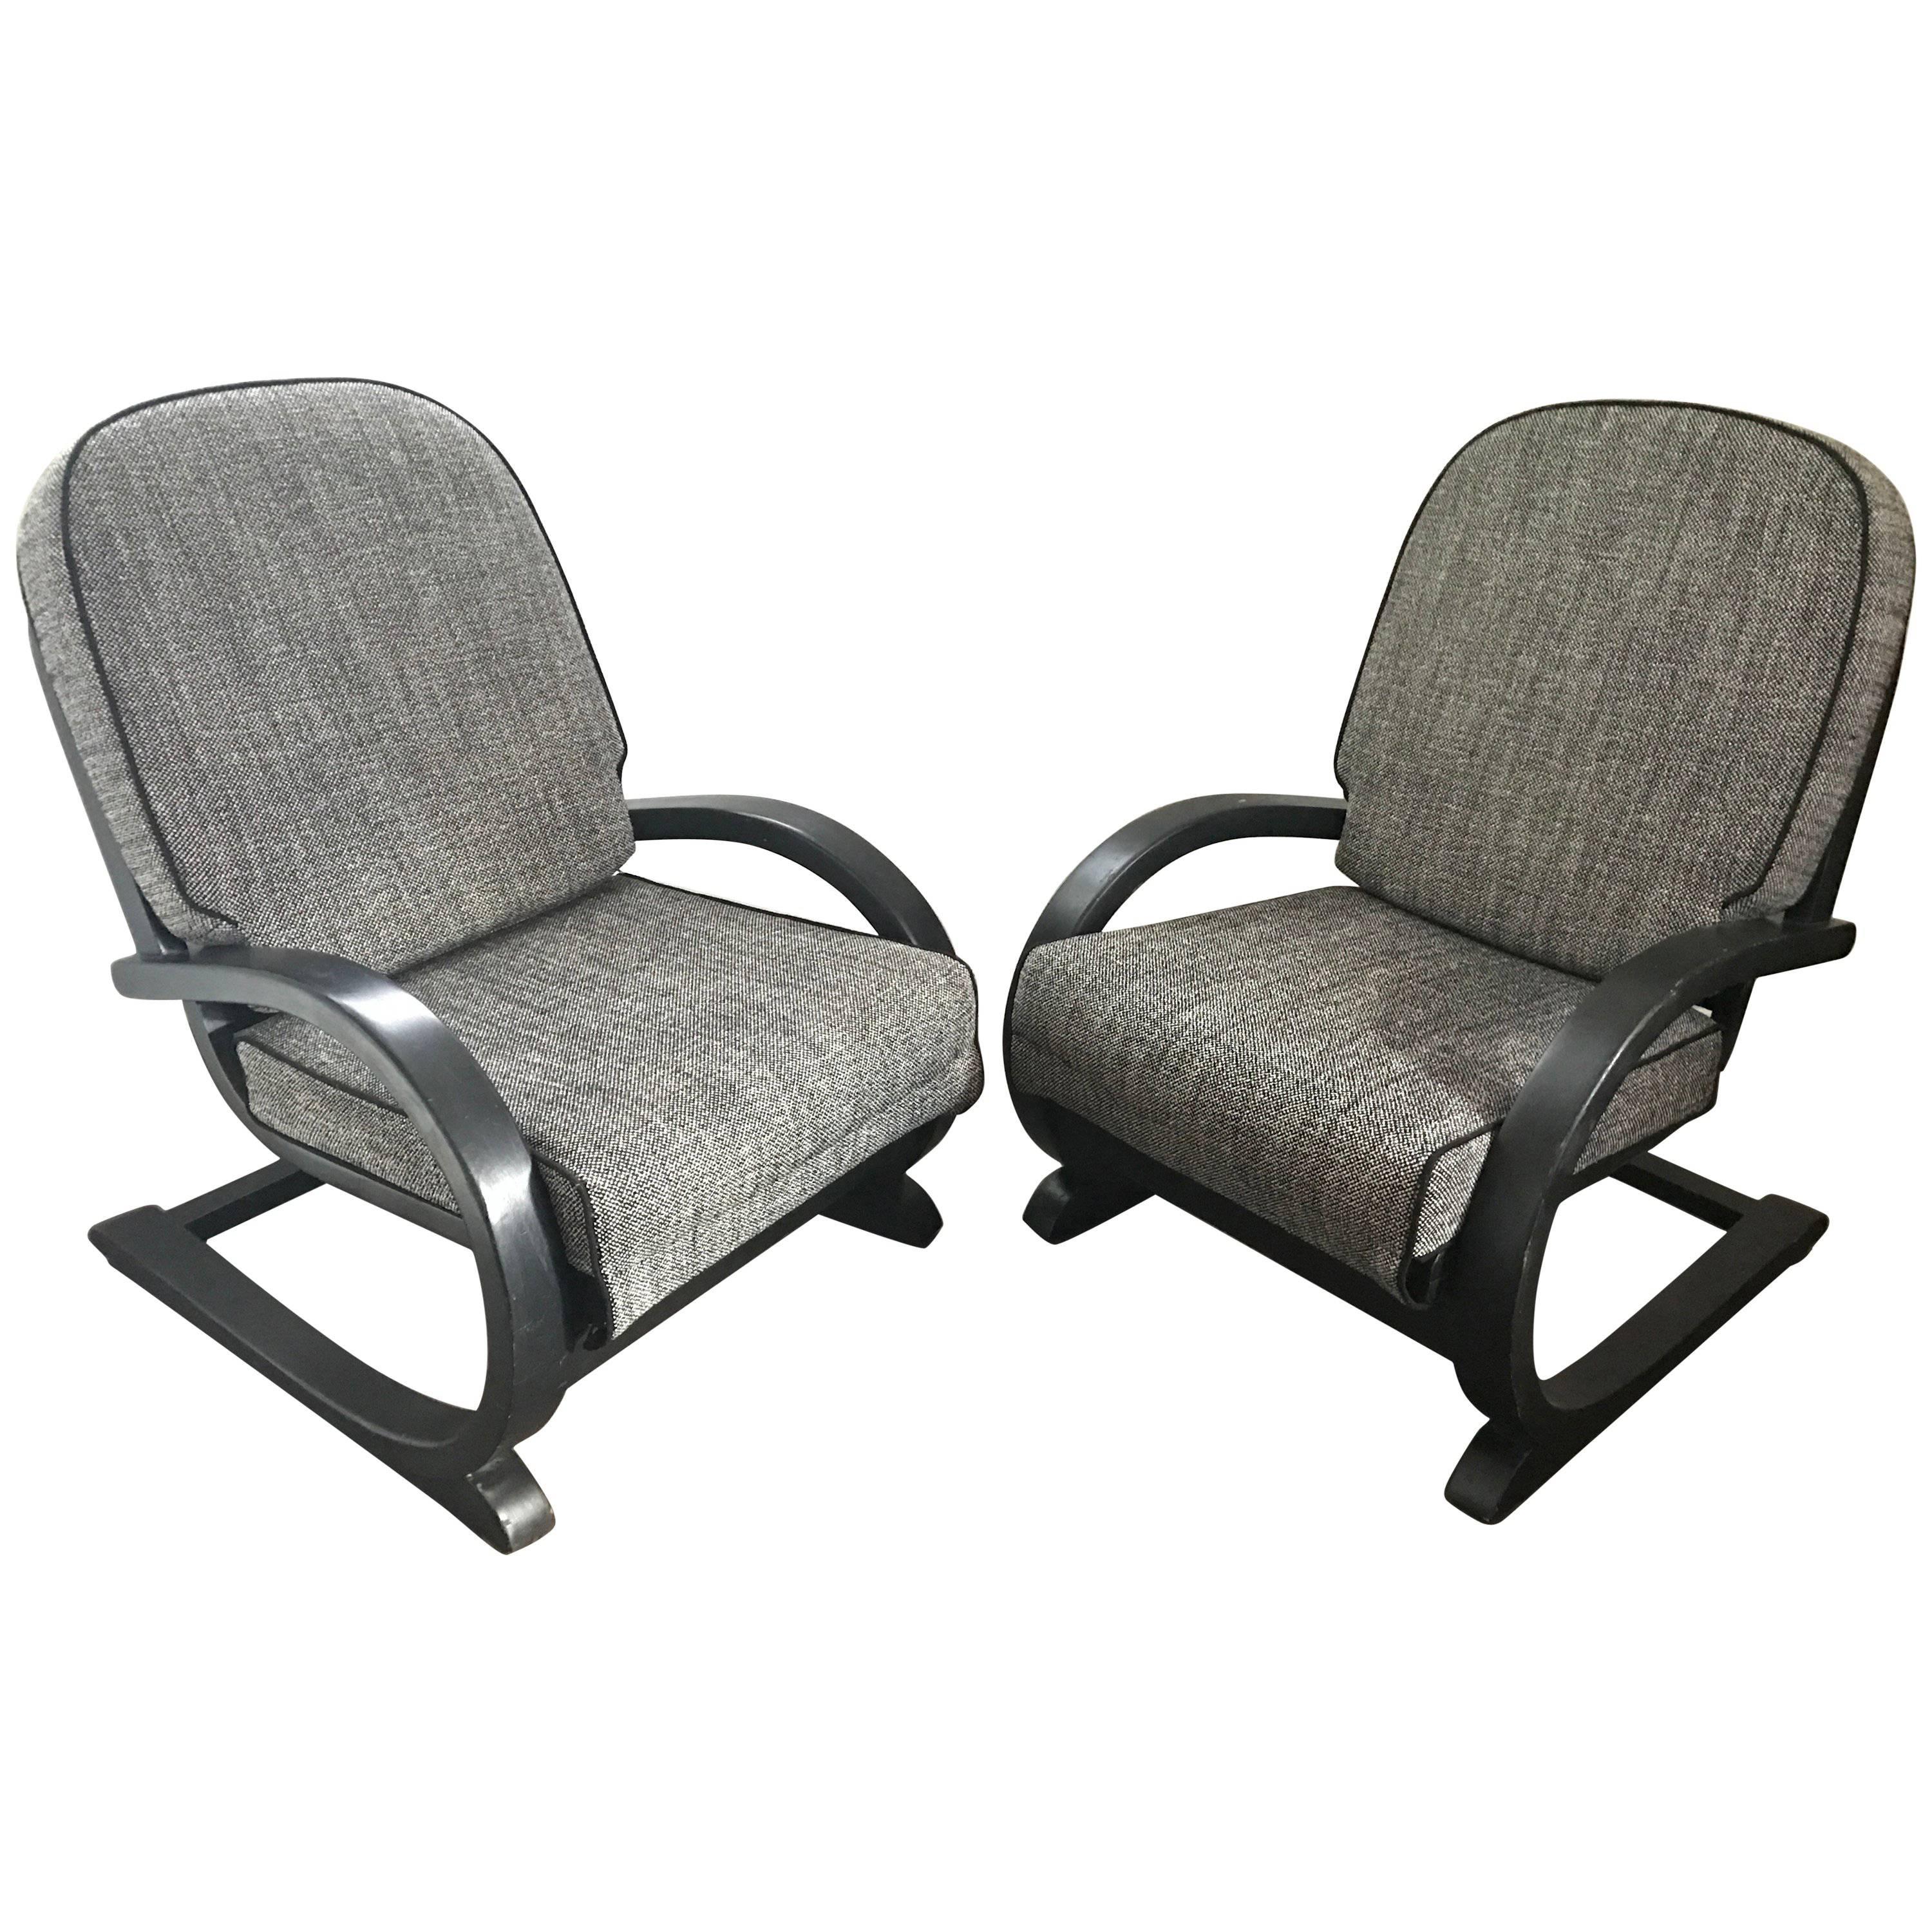 1937 Pair of Famulus British PE Gane, Modernist Art Deco Cantilever Armchairs For Sale